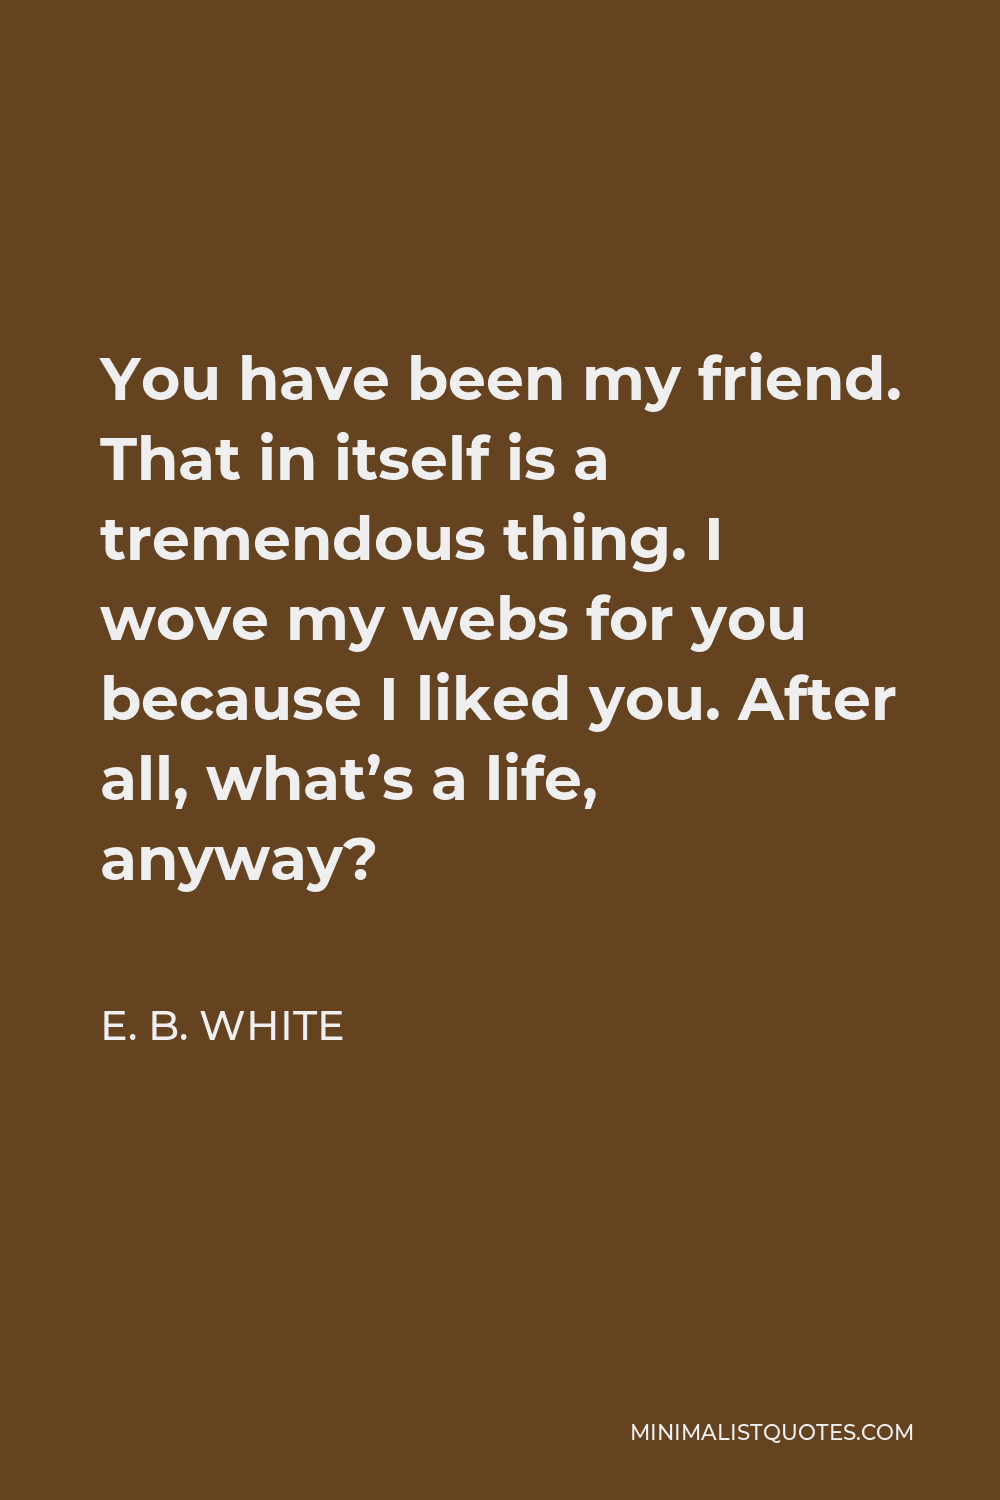 E. B. White Quote - You have been my friend. That in itself is a tremendous thing. I wove my webs for you because I liked you. After all, what’s a life, anyway?